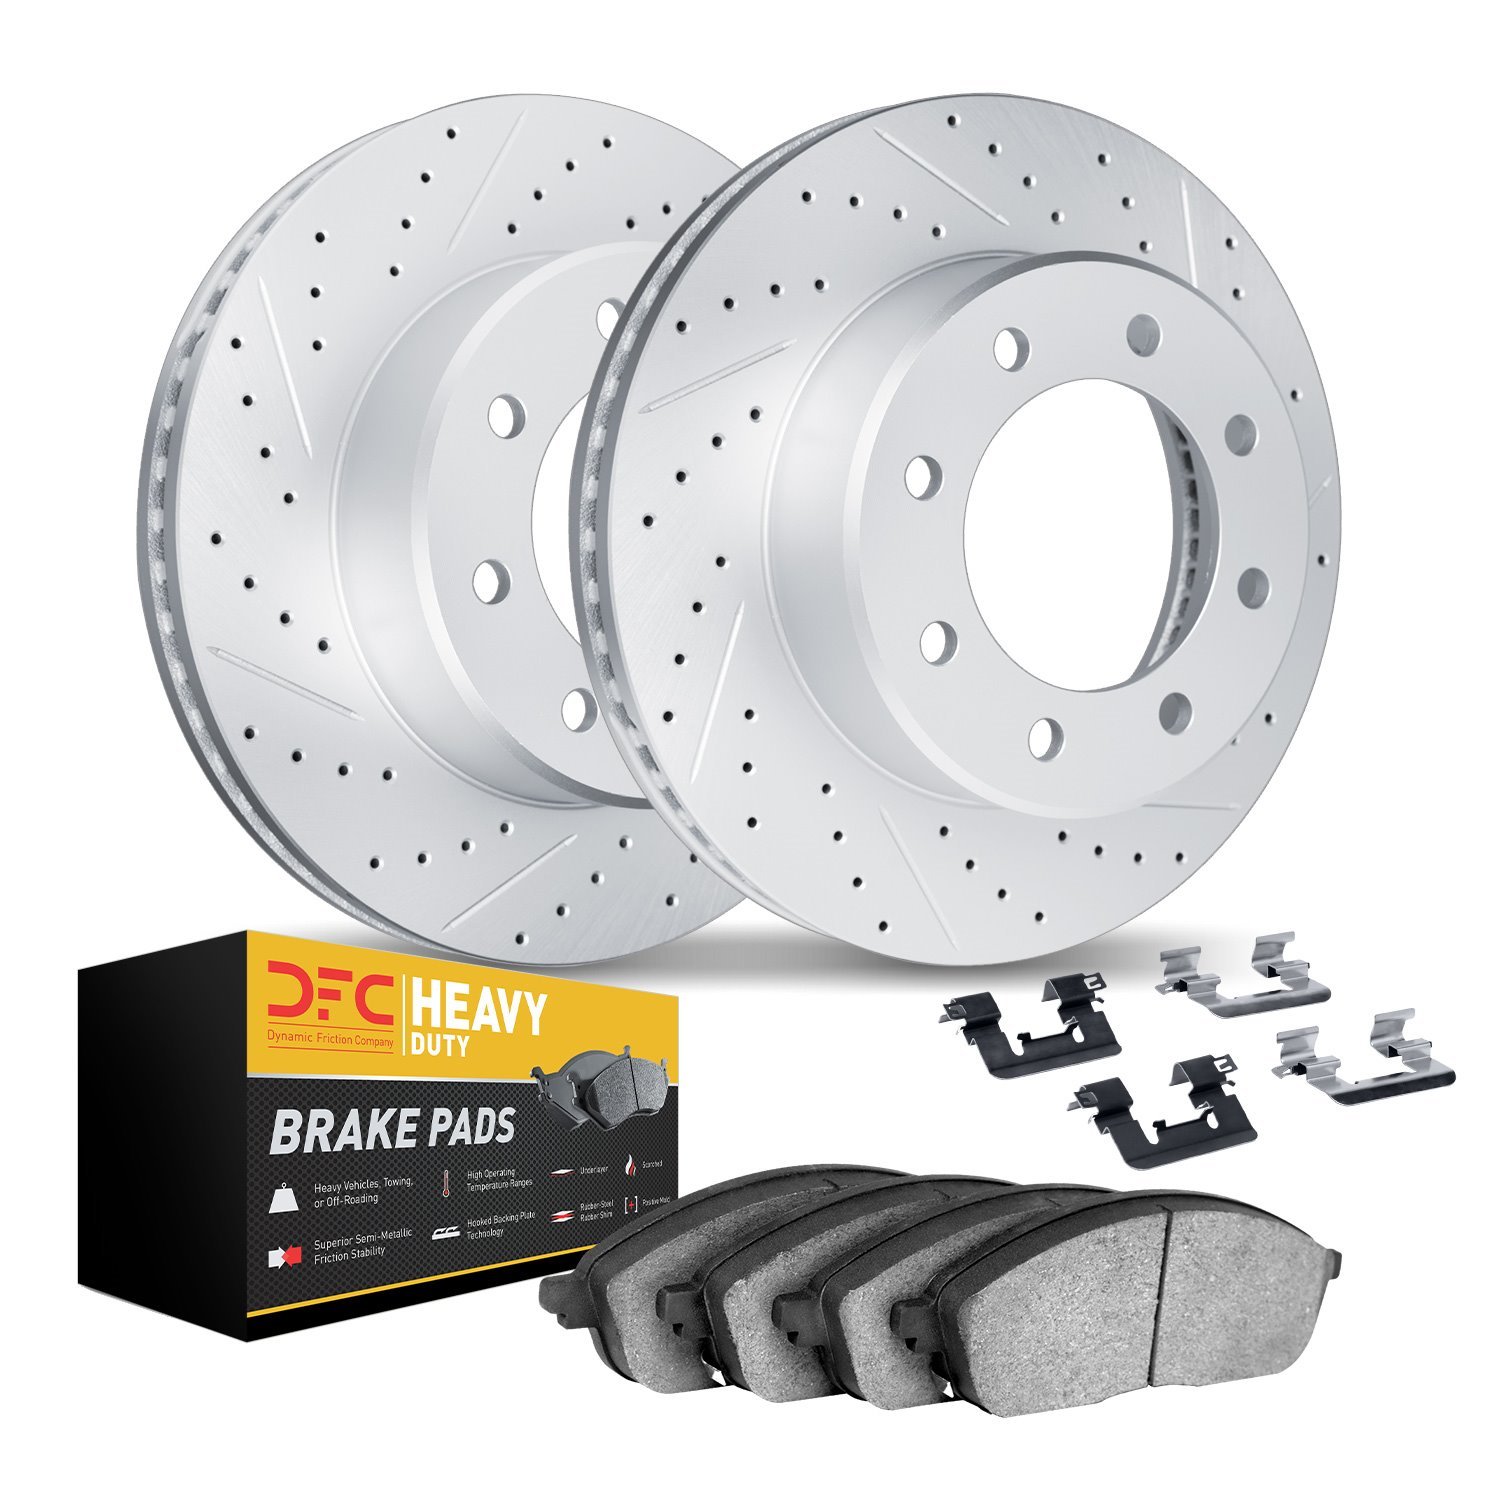 2212-99160 Geoperformance Drilled/Slotted Rotors w/Heavy-Duty Pads Kit & Hardware, 2005-2007 Ford/Lincoln/Mercury/Mazda, Positio